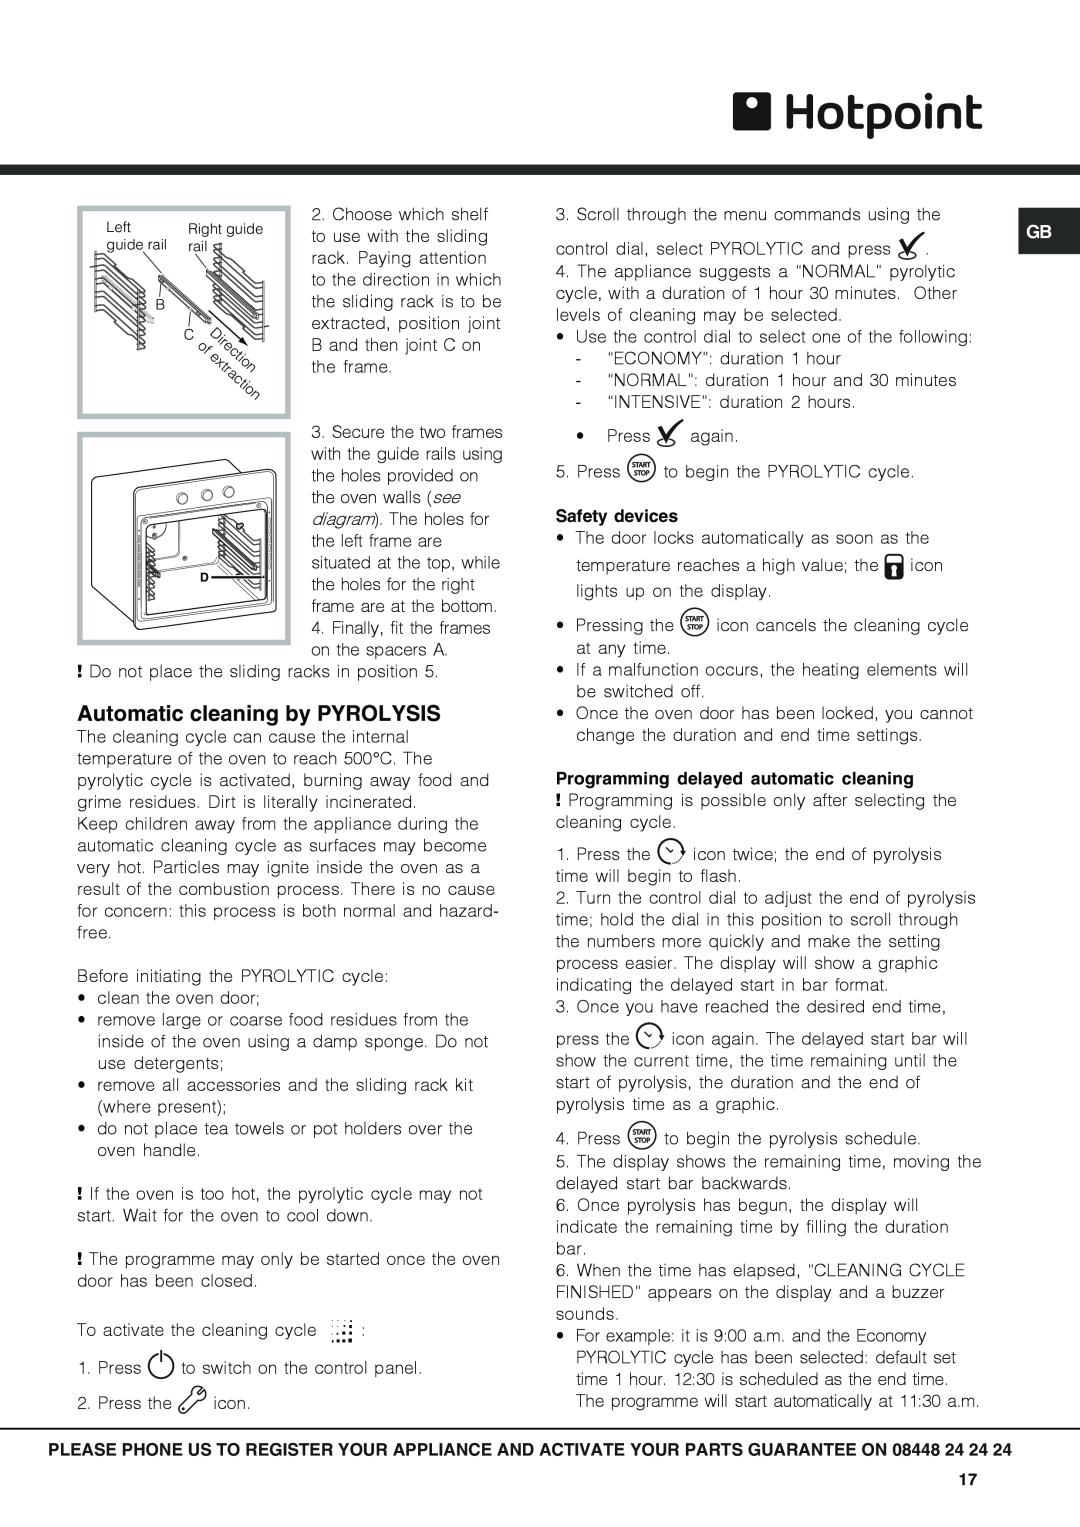 Hotpoint SX 1046Q PX, SX1046L PX operating instructions Automatic cleaning by PYROLYSIS 